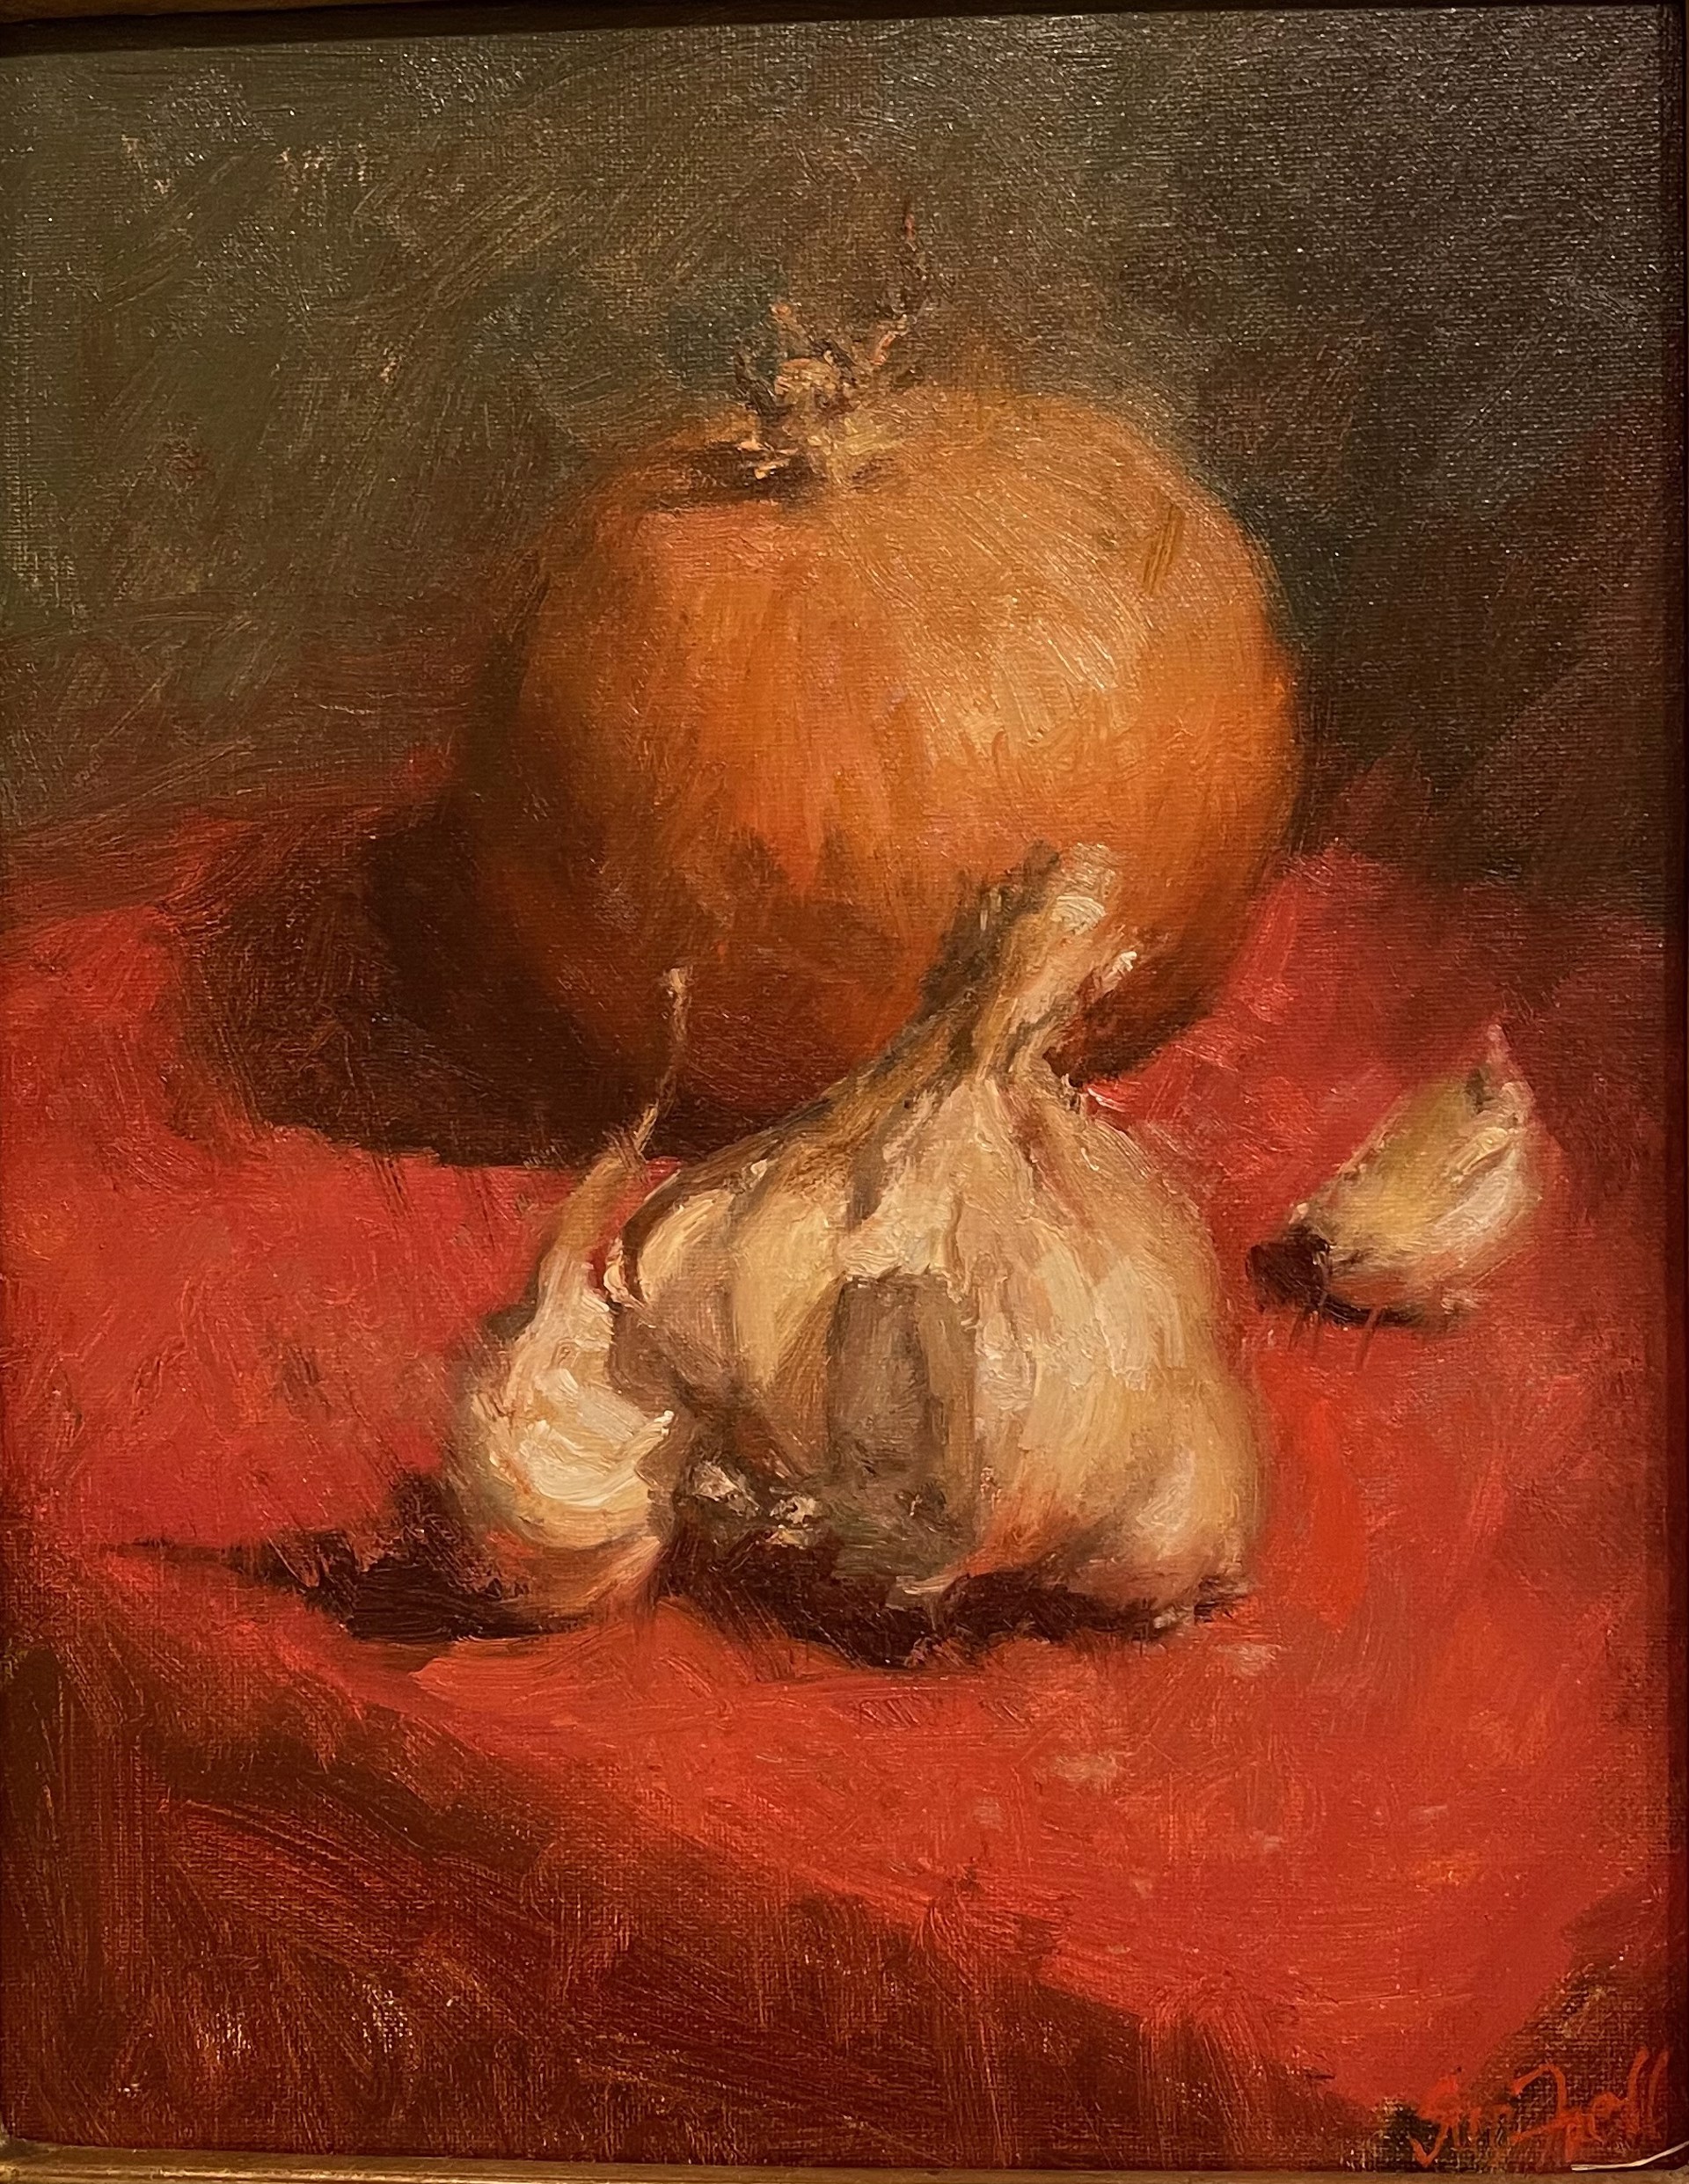 Garlic and Onion by Sue Foell